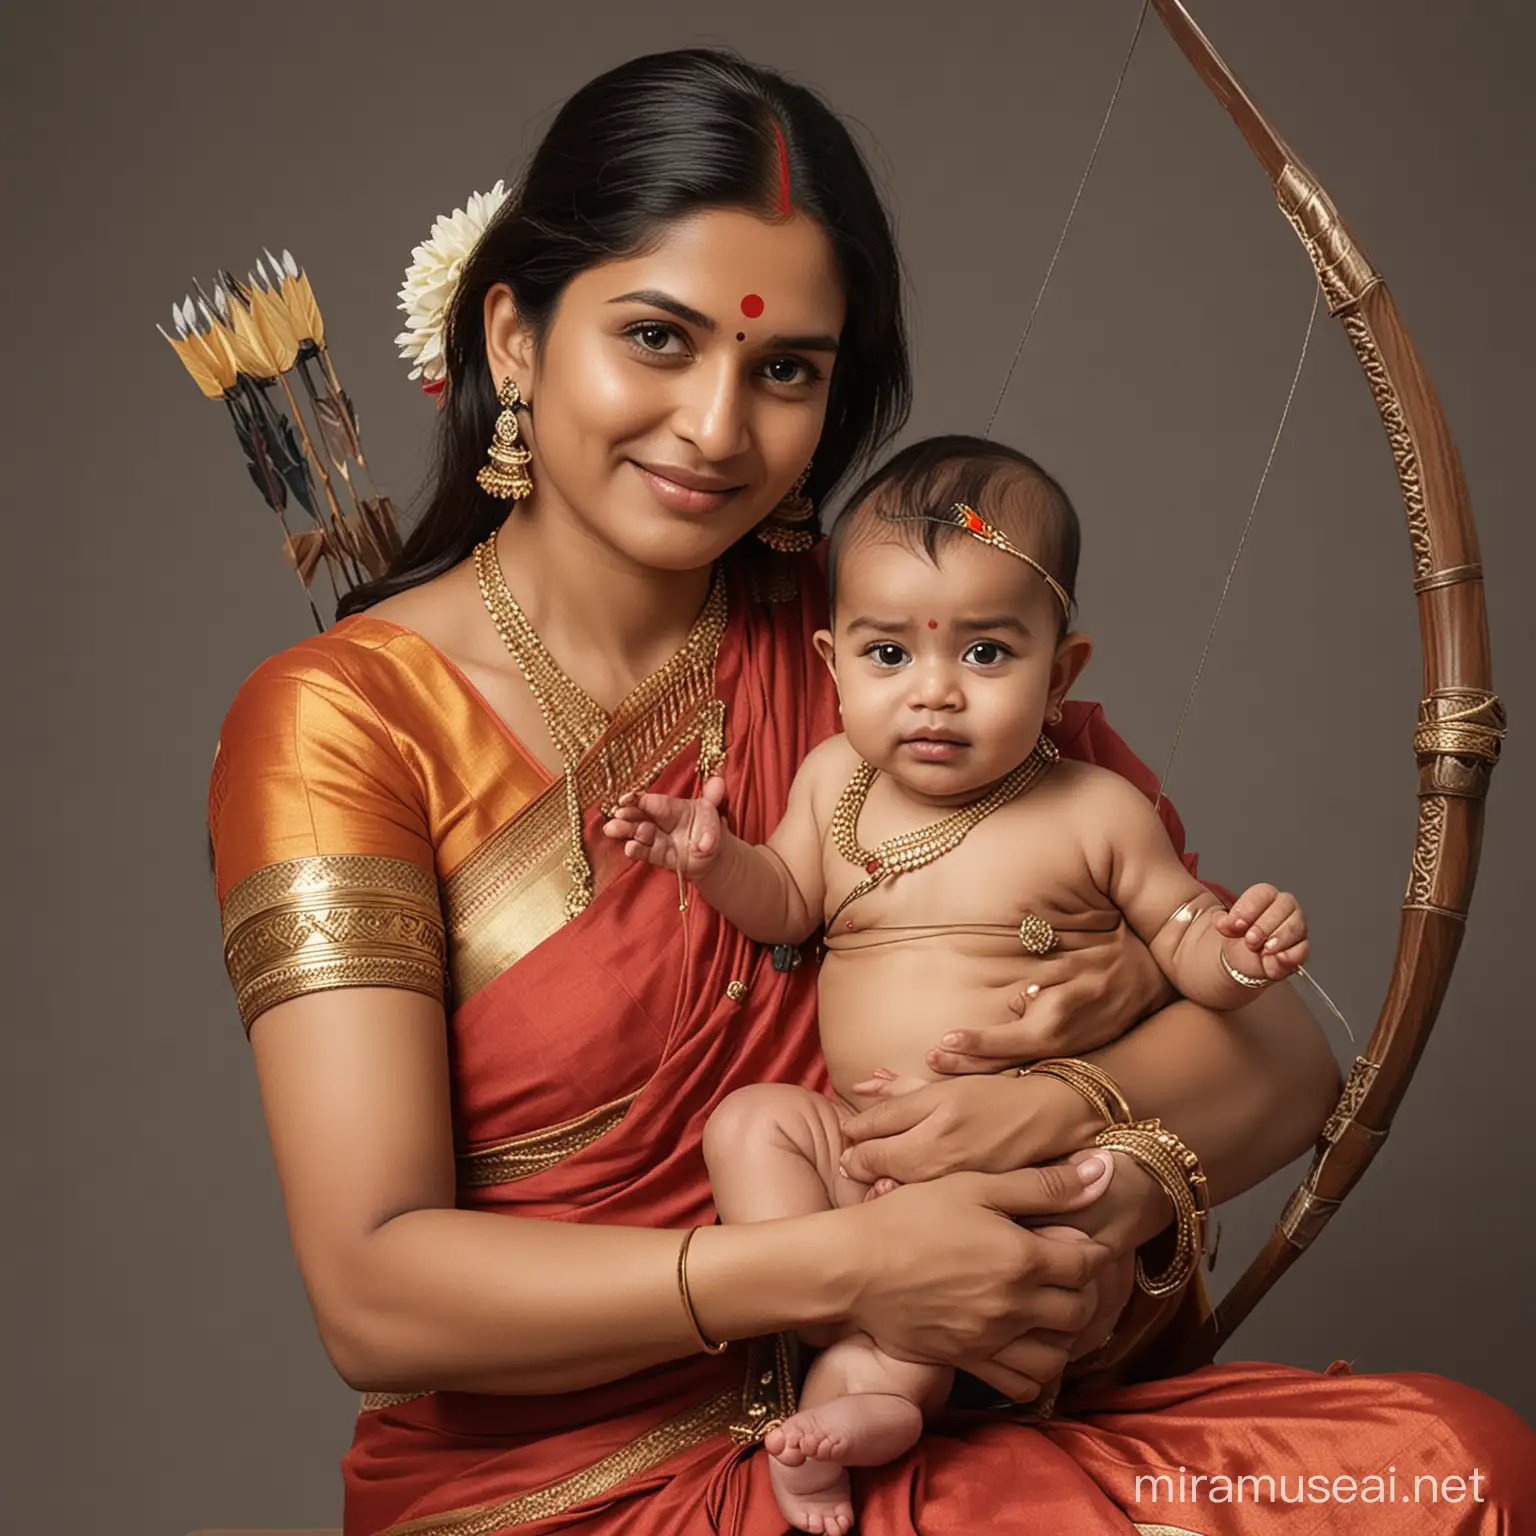 image of load RAMA with big U Shape tilak and bow and arrow as baby avatar seating in the lap of his mother(only one baby), side face of mother, without any background, full size image